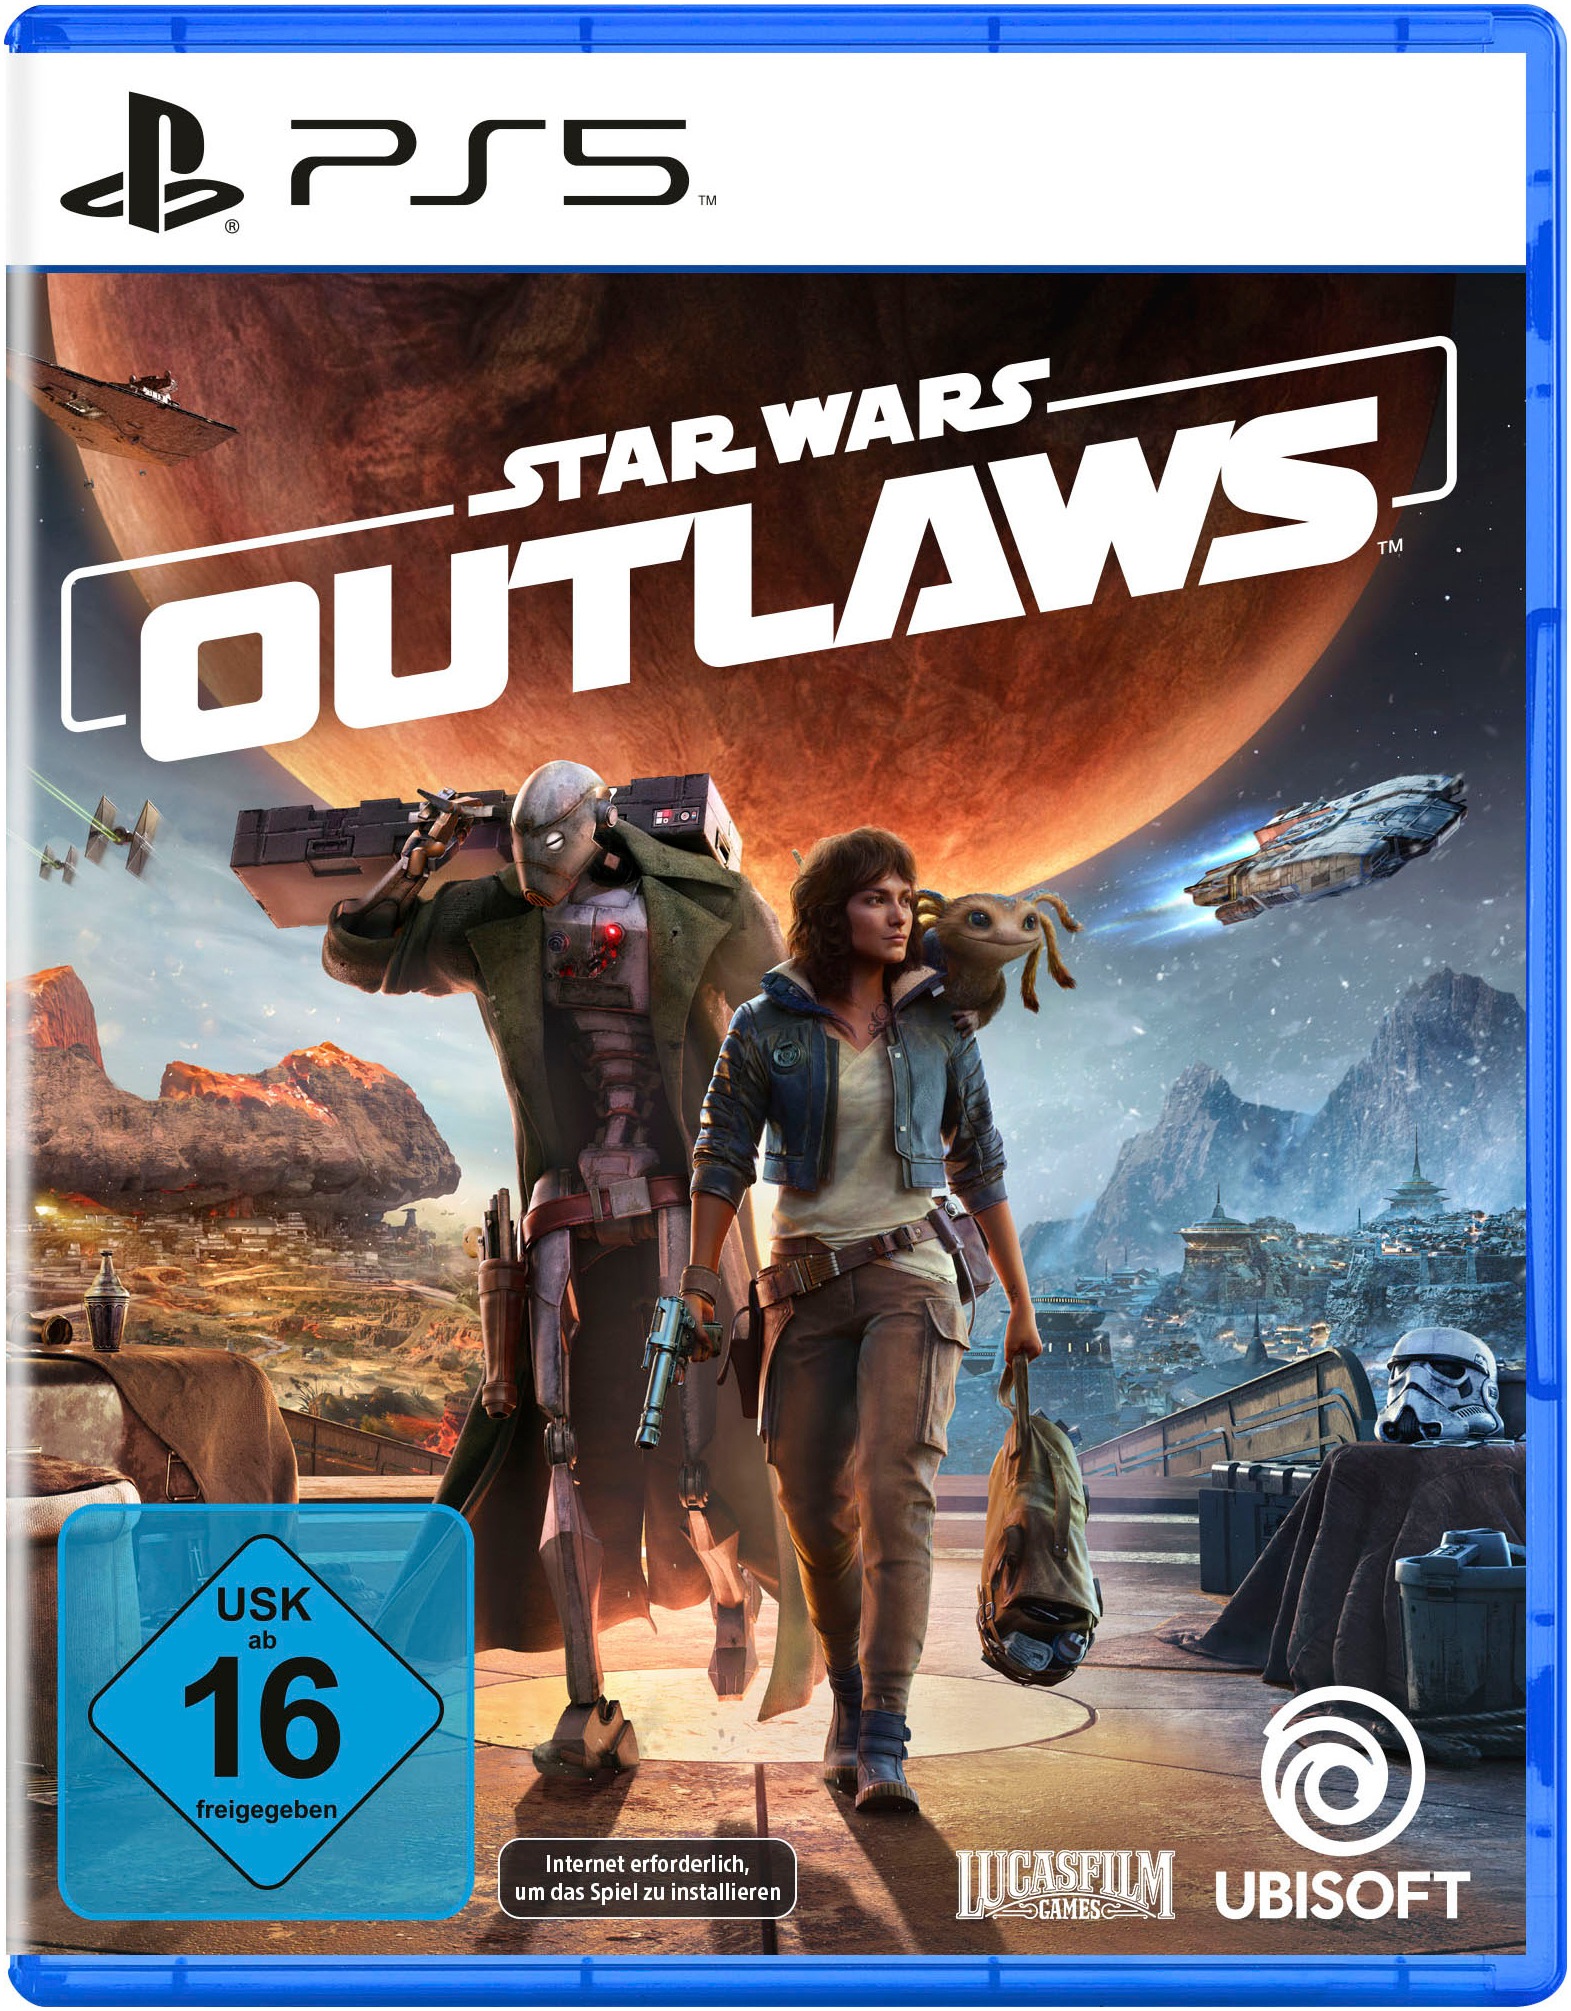 Spielesoftware »Star Wars Outlaws«, PlayStation 5